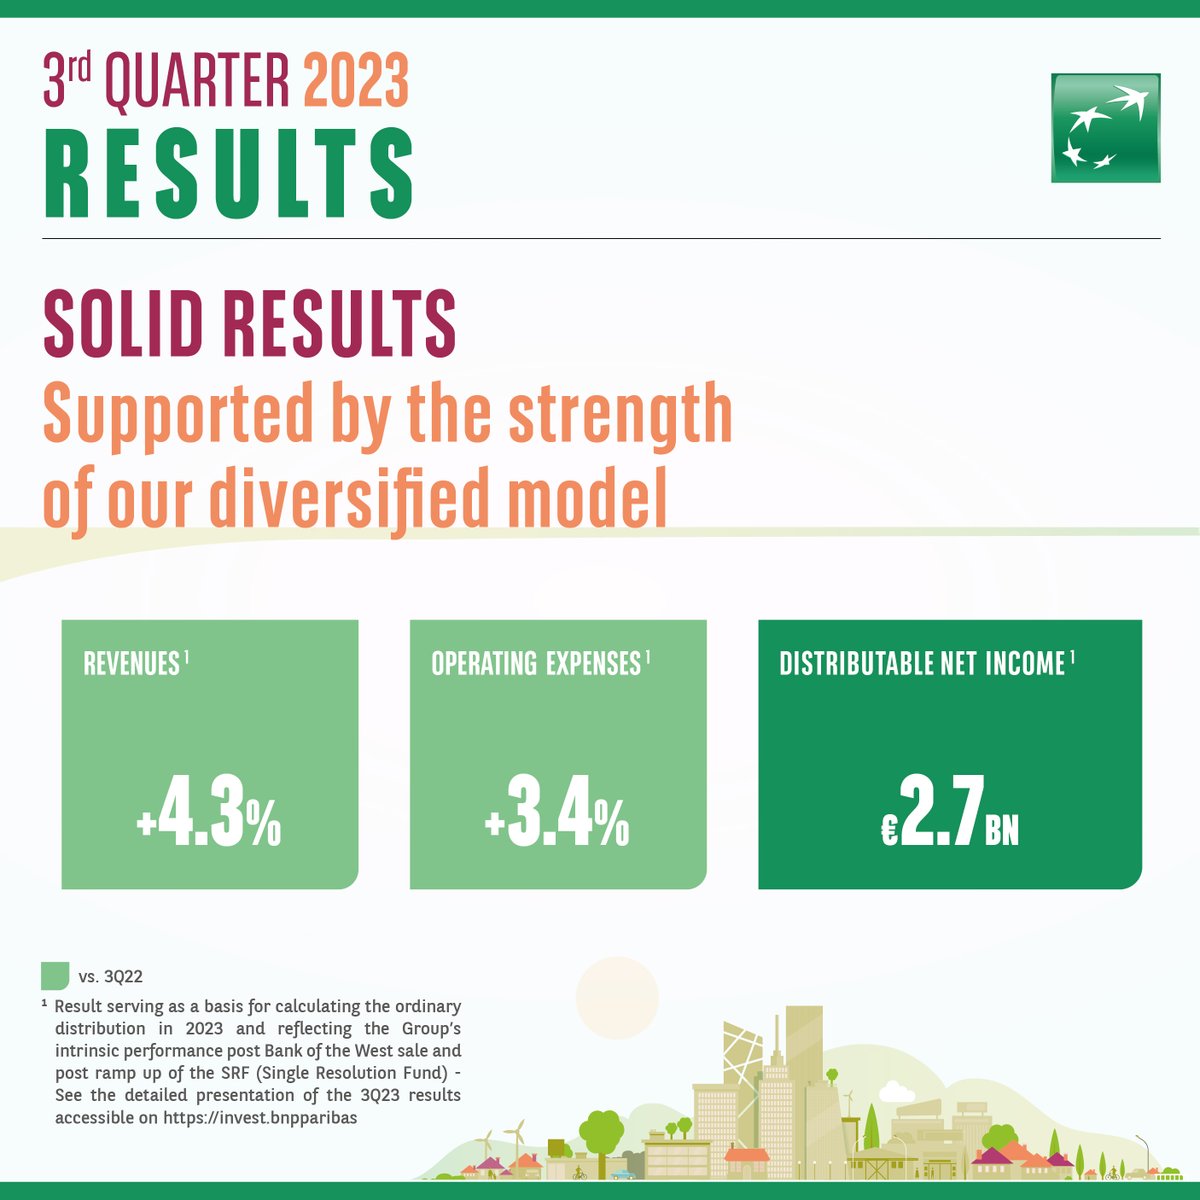 #BNPPResults BNP Paribas’ diversified and integrated model and its ability to accompany clients and the economy in a comprehensive way by mobilising its teams, resources and capabilities, continued to drive growth in activity and results in the 3Q2023. bnpp.lk/3Q23